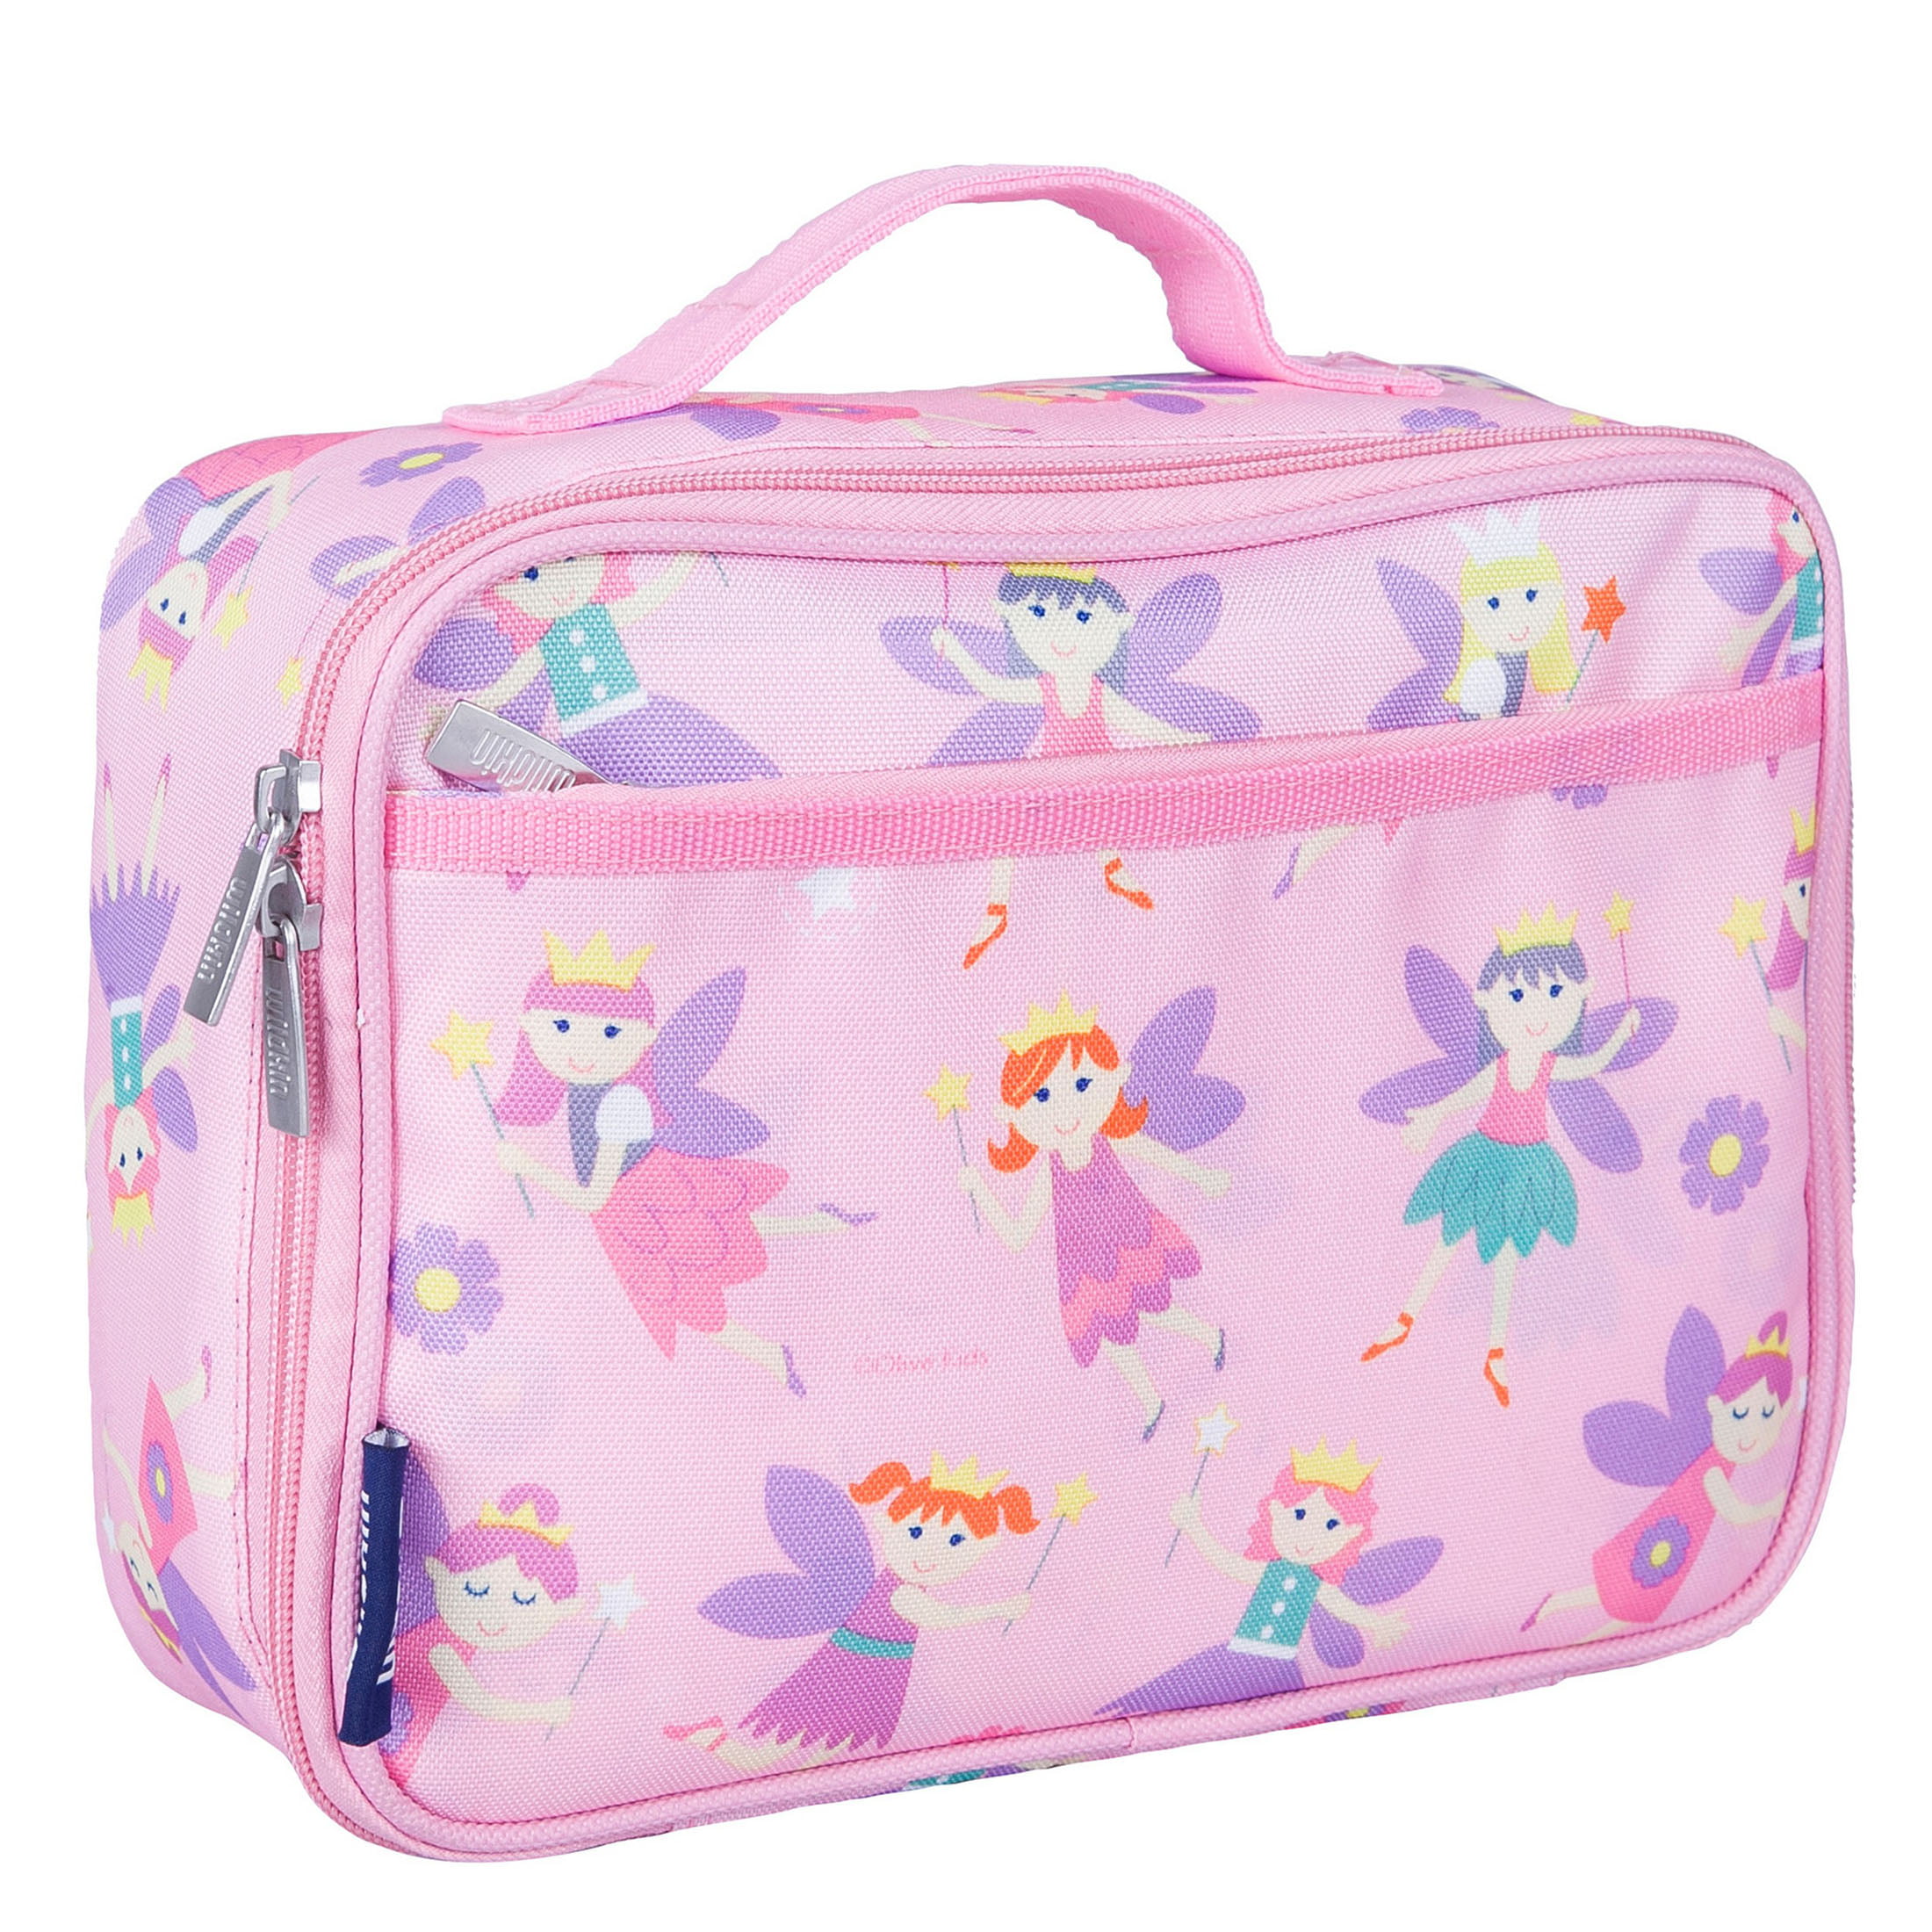 Lunch Box Lunch Box Pink Chill Roll Turtle With Flower & Name Desired Name  Gift School Enrollment School Kindergarten LB21 